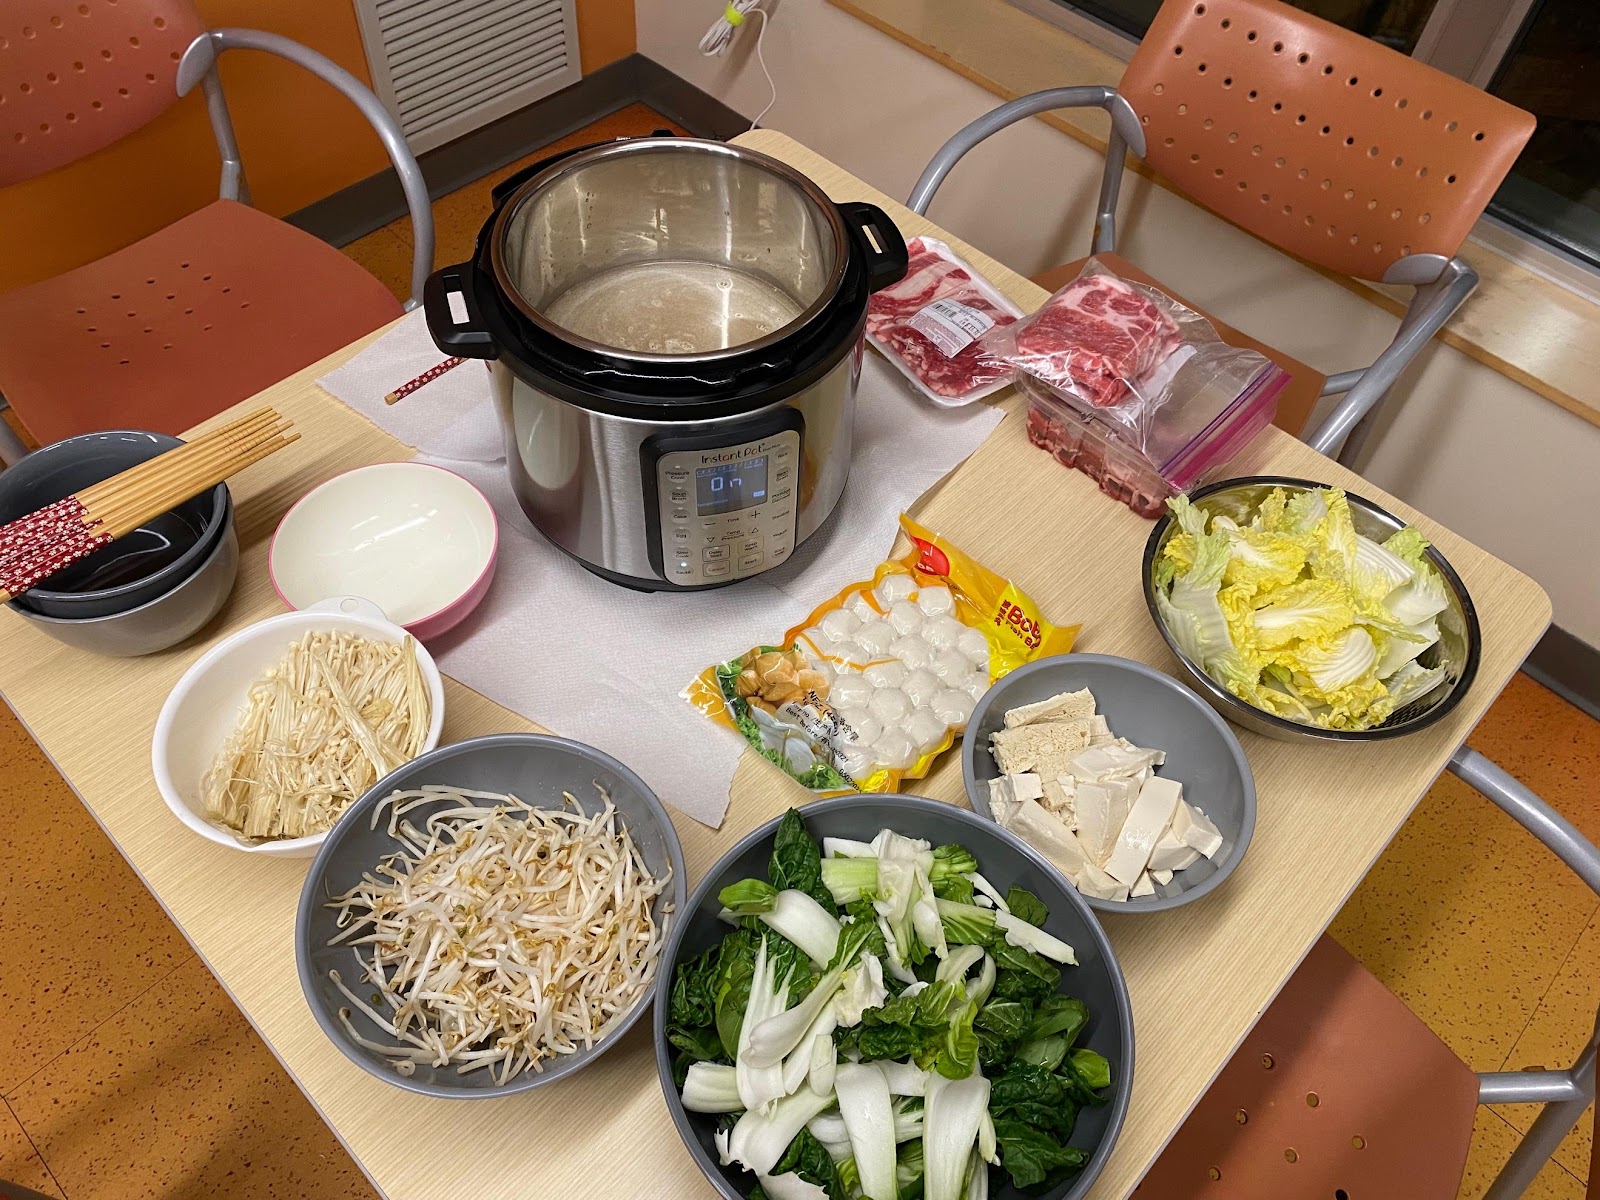 A spread of hot pot ingredients are arranged in bowls and containers on a table, surrounding an Instant Pot.